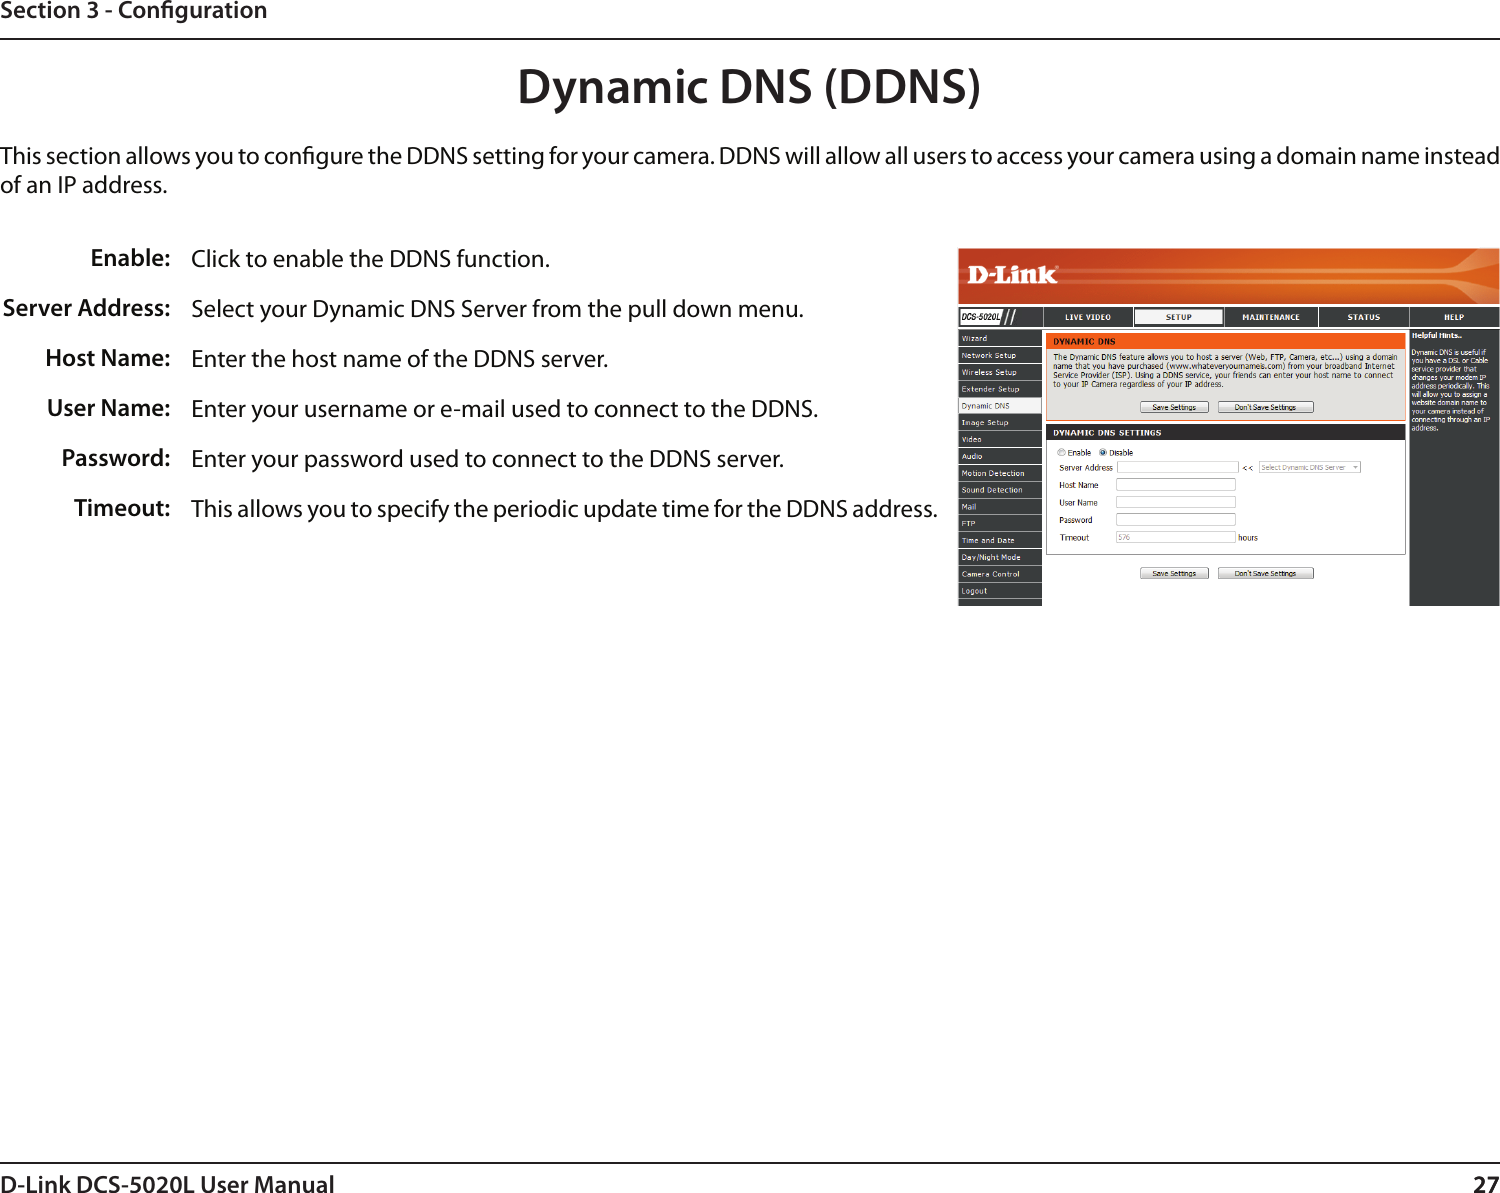 27D-Link DCS-5020L User Manual 27Section 3 - CongurationClick to enable the DDNS function.Select your Dynamic DNS Server from the pull down menu.Enter the host name of the DDNS server.Enter your username or e-mail used to connect to the DDNS.Enter your password used to connect to the DDNS server.This allows you to specify the periodic update time for the DDNS address. Enable:Server Address: Host Name:User Name:Password:Timeout:Dynamic DNS (DDNS)This section allows you to congure the DDNS setting for your camera. DDNS will allow all users to access your camera using a domain name instead of an IP address.